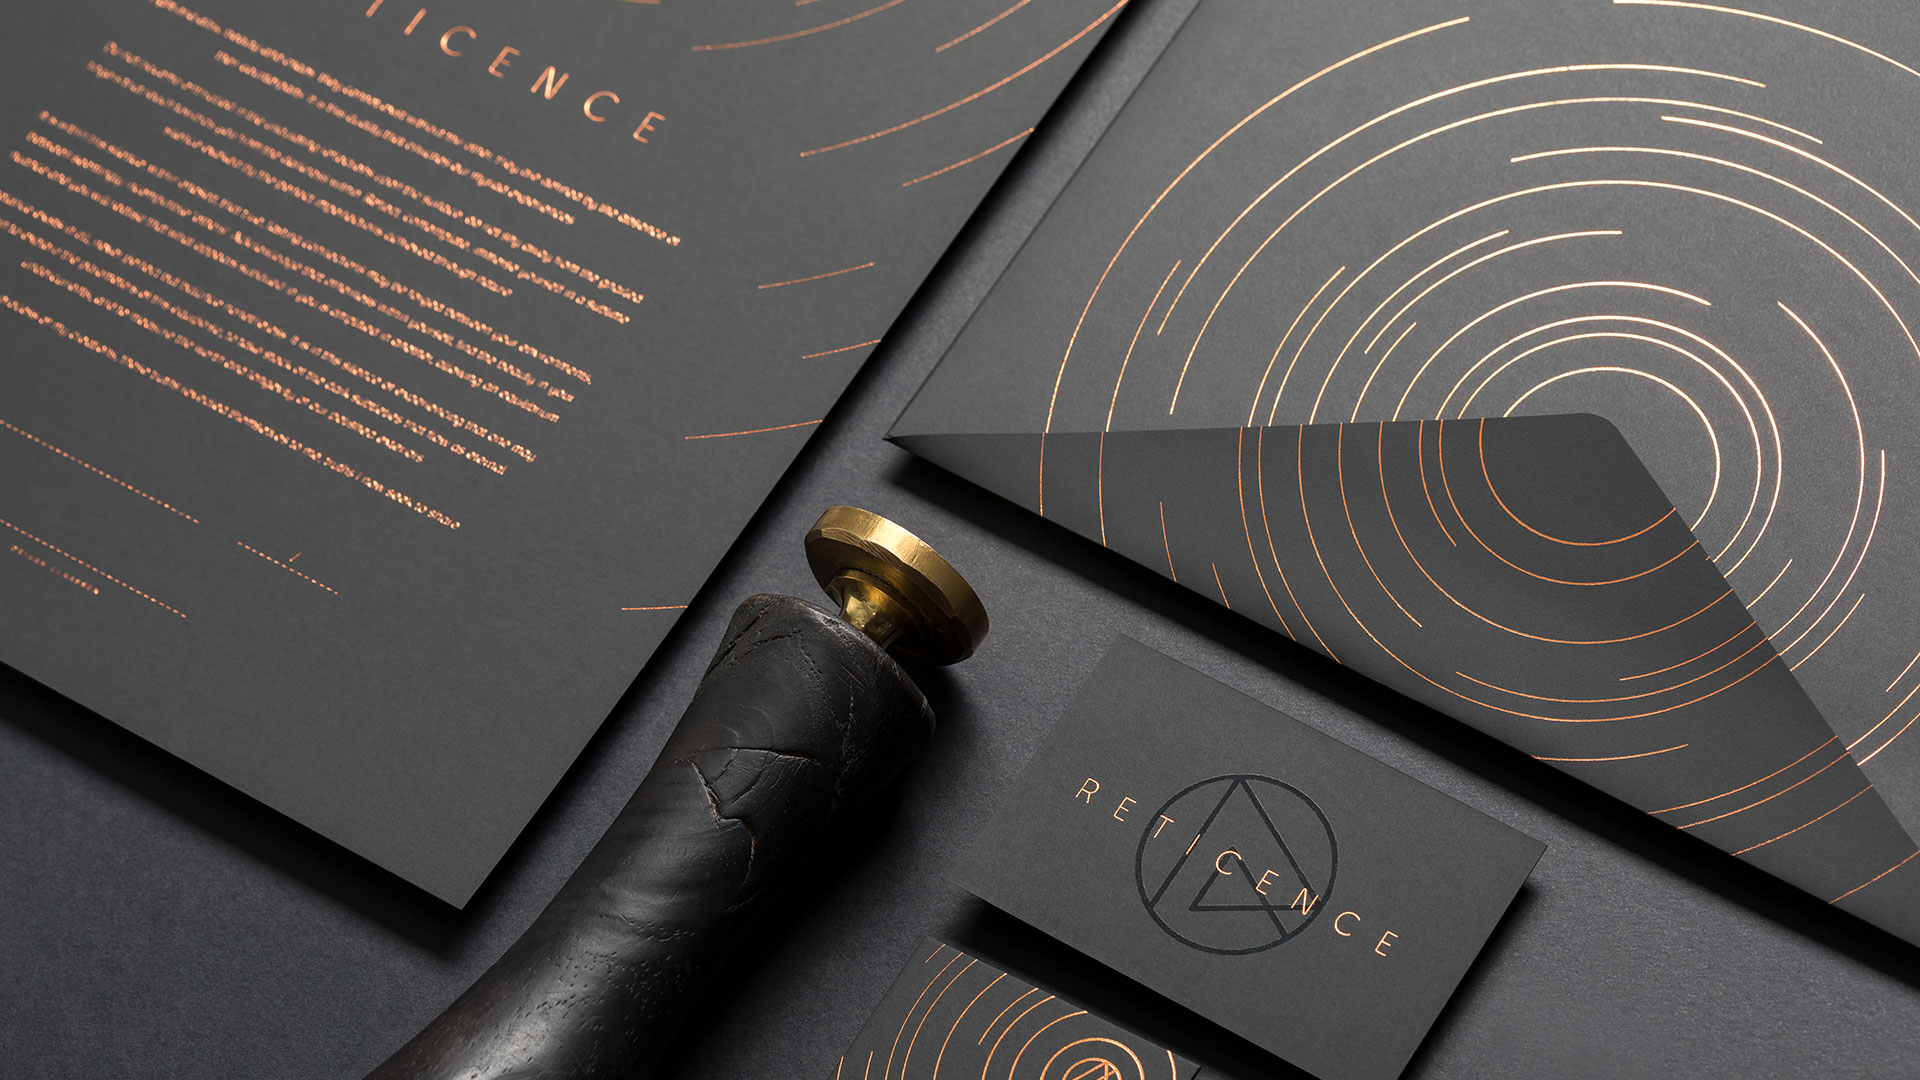 Reticence Stationery - PaperSpecs